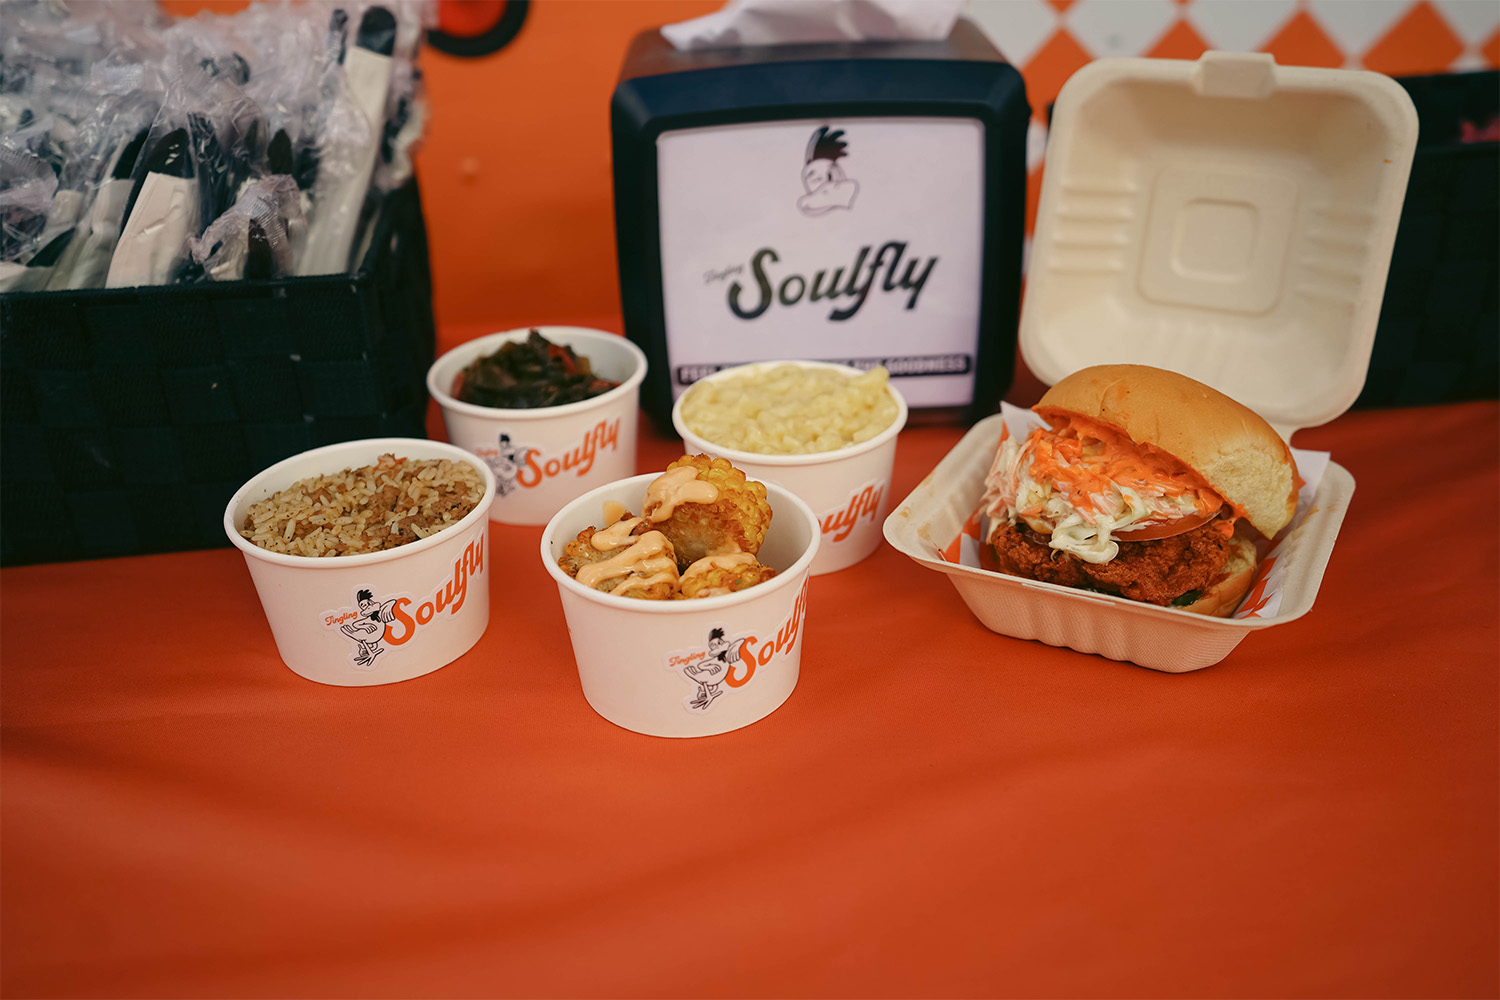 A spread of food on a table from Soulfly Chicken in Miami